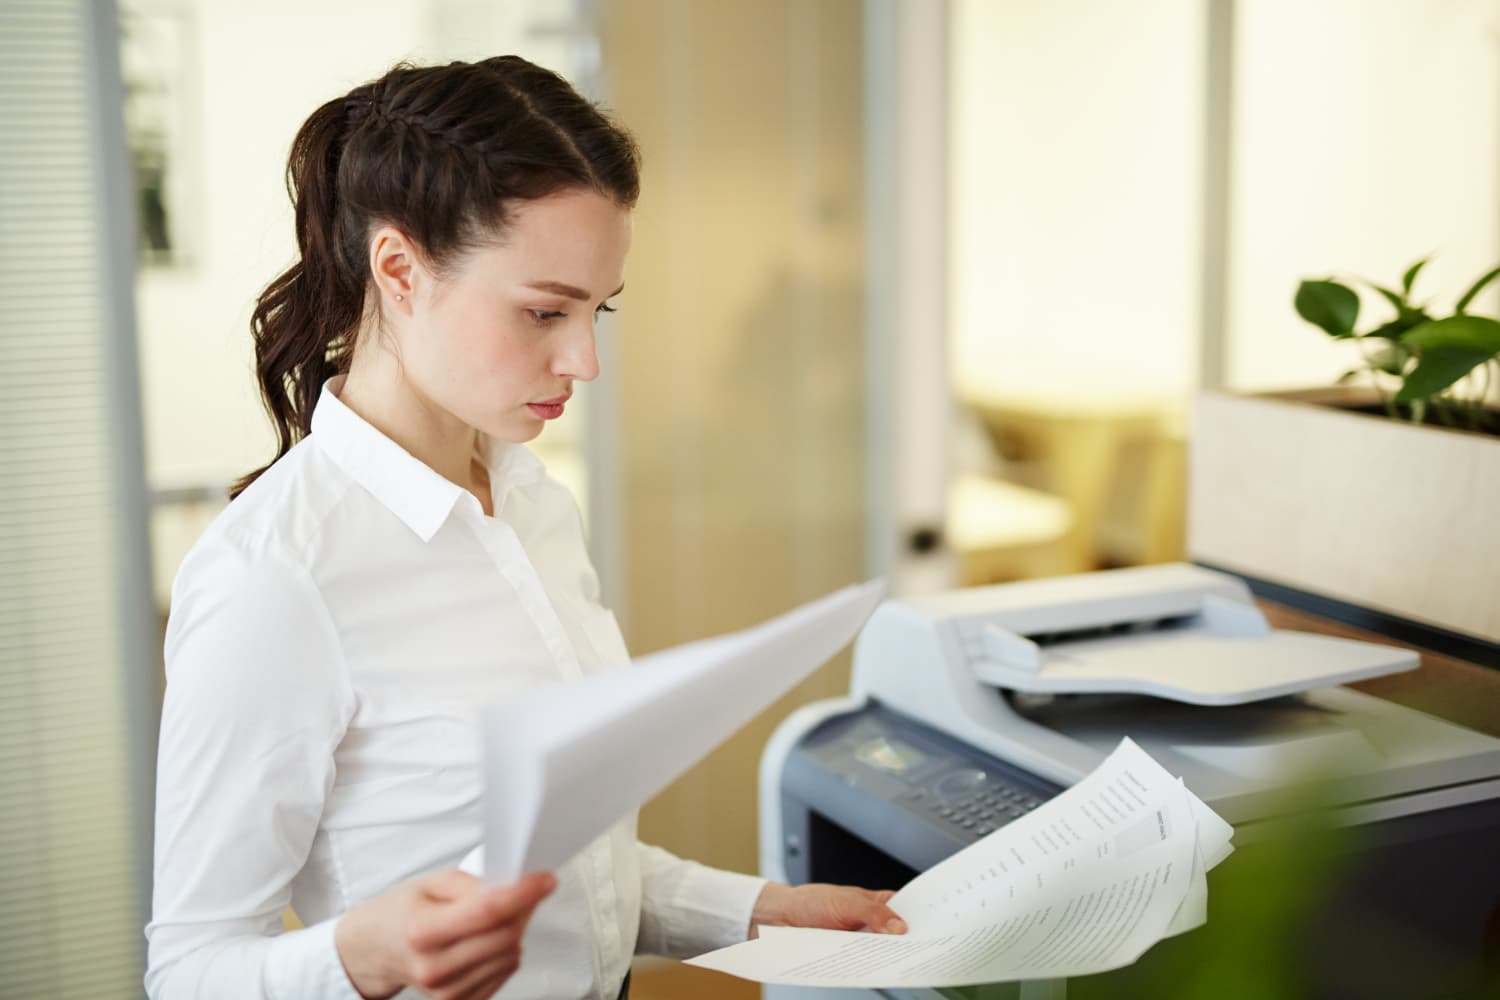 Comparing copier lease costs: Making an informed decision